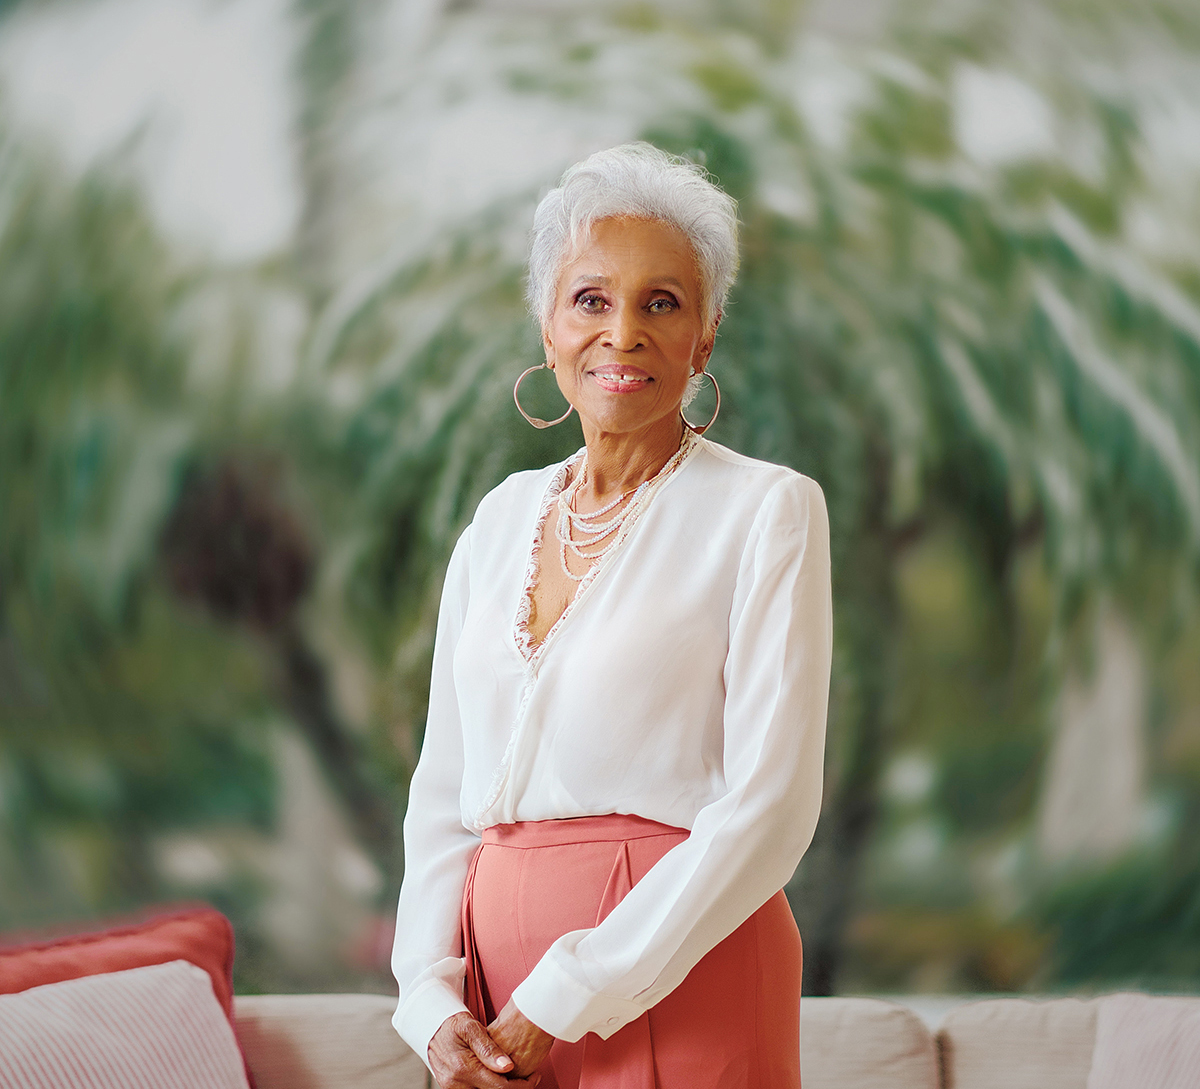 Dorothy Butler Gilliam in Sarasota for the Hear Me Roar Luncheon. Photo by Evan Sigmund.